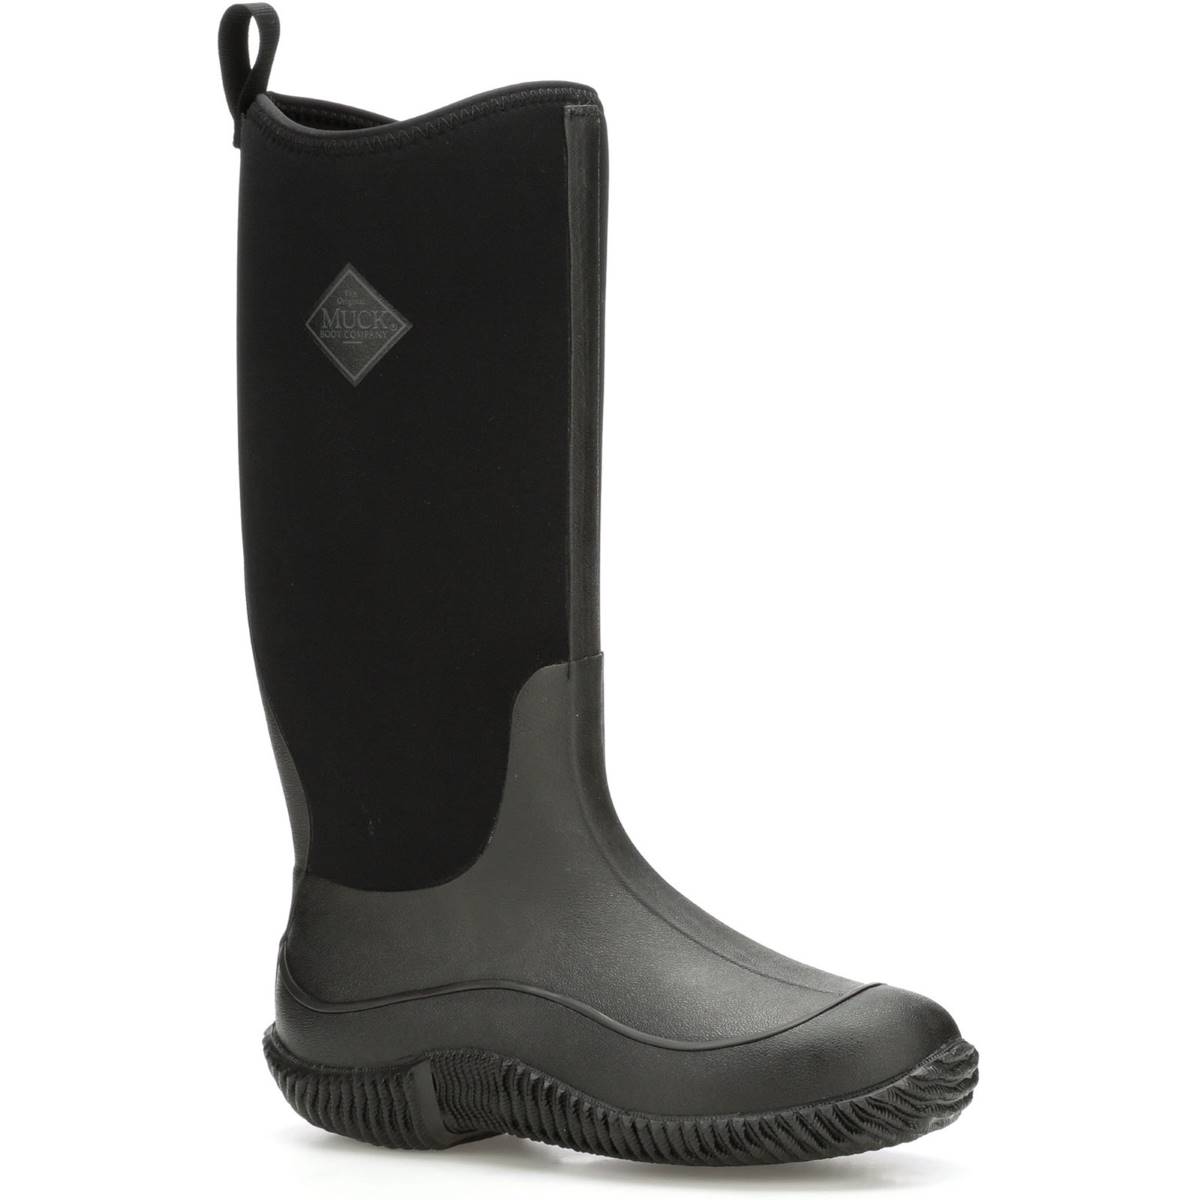 Muck Boots Hale Black Womens Wellingtons HAW-000 in a Plain Rubber in Size 5